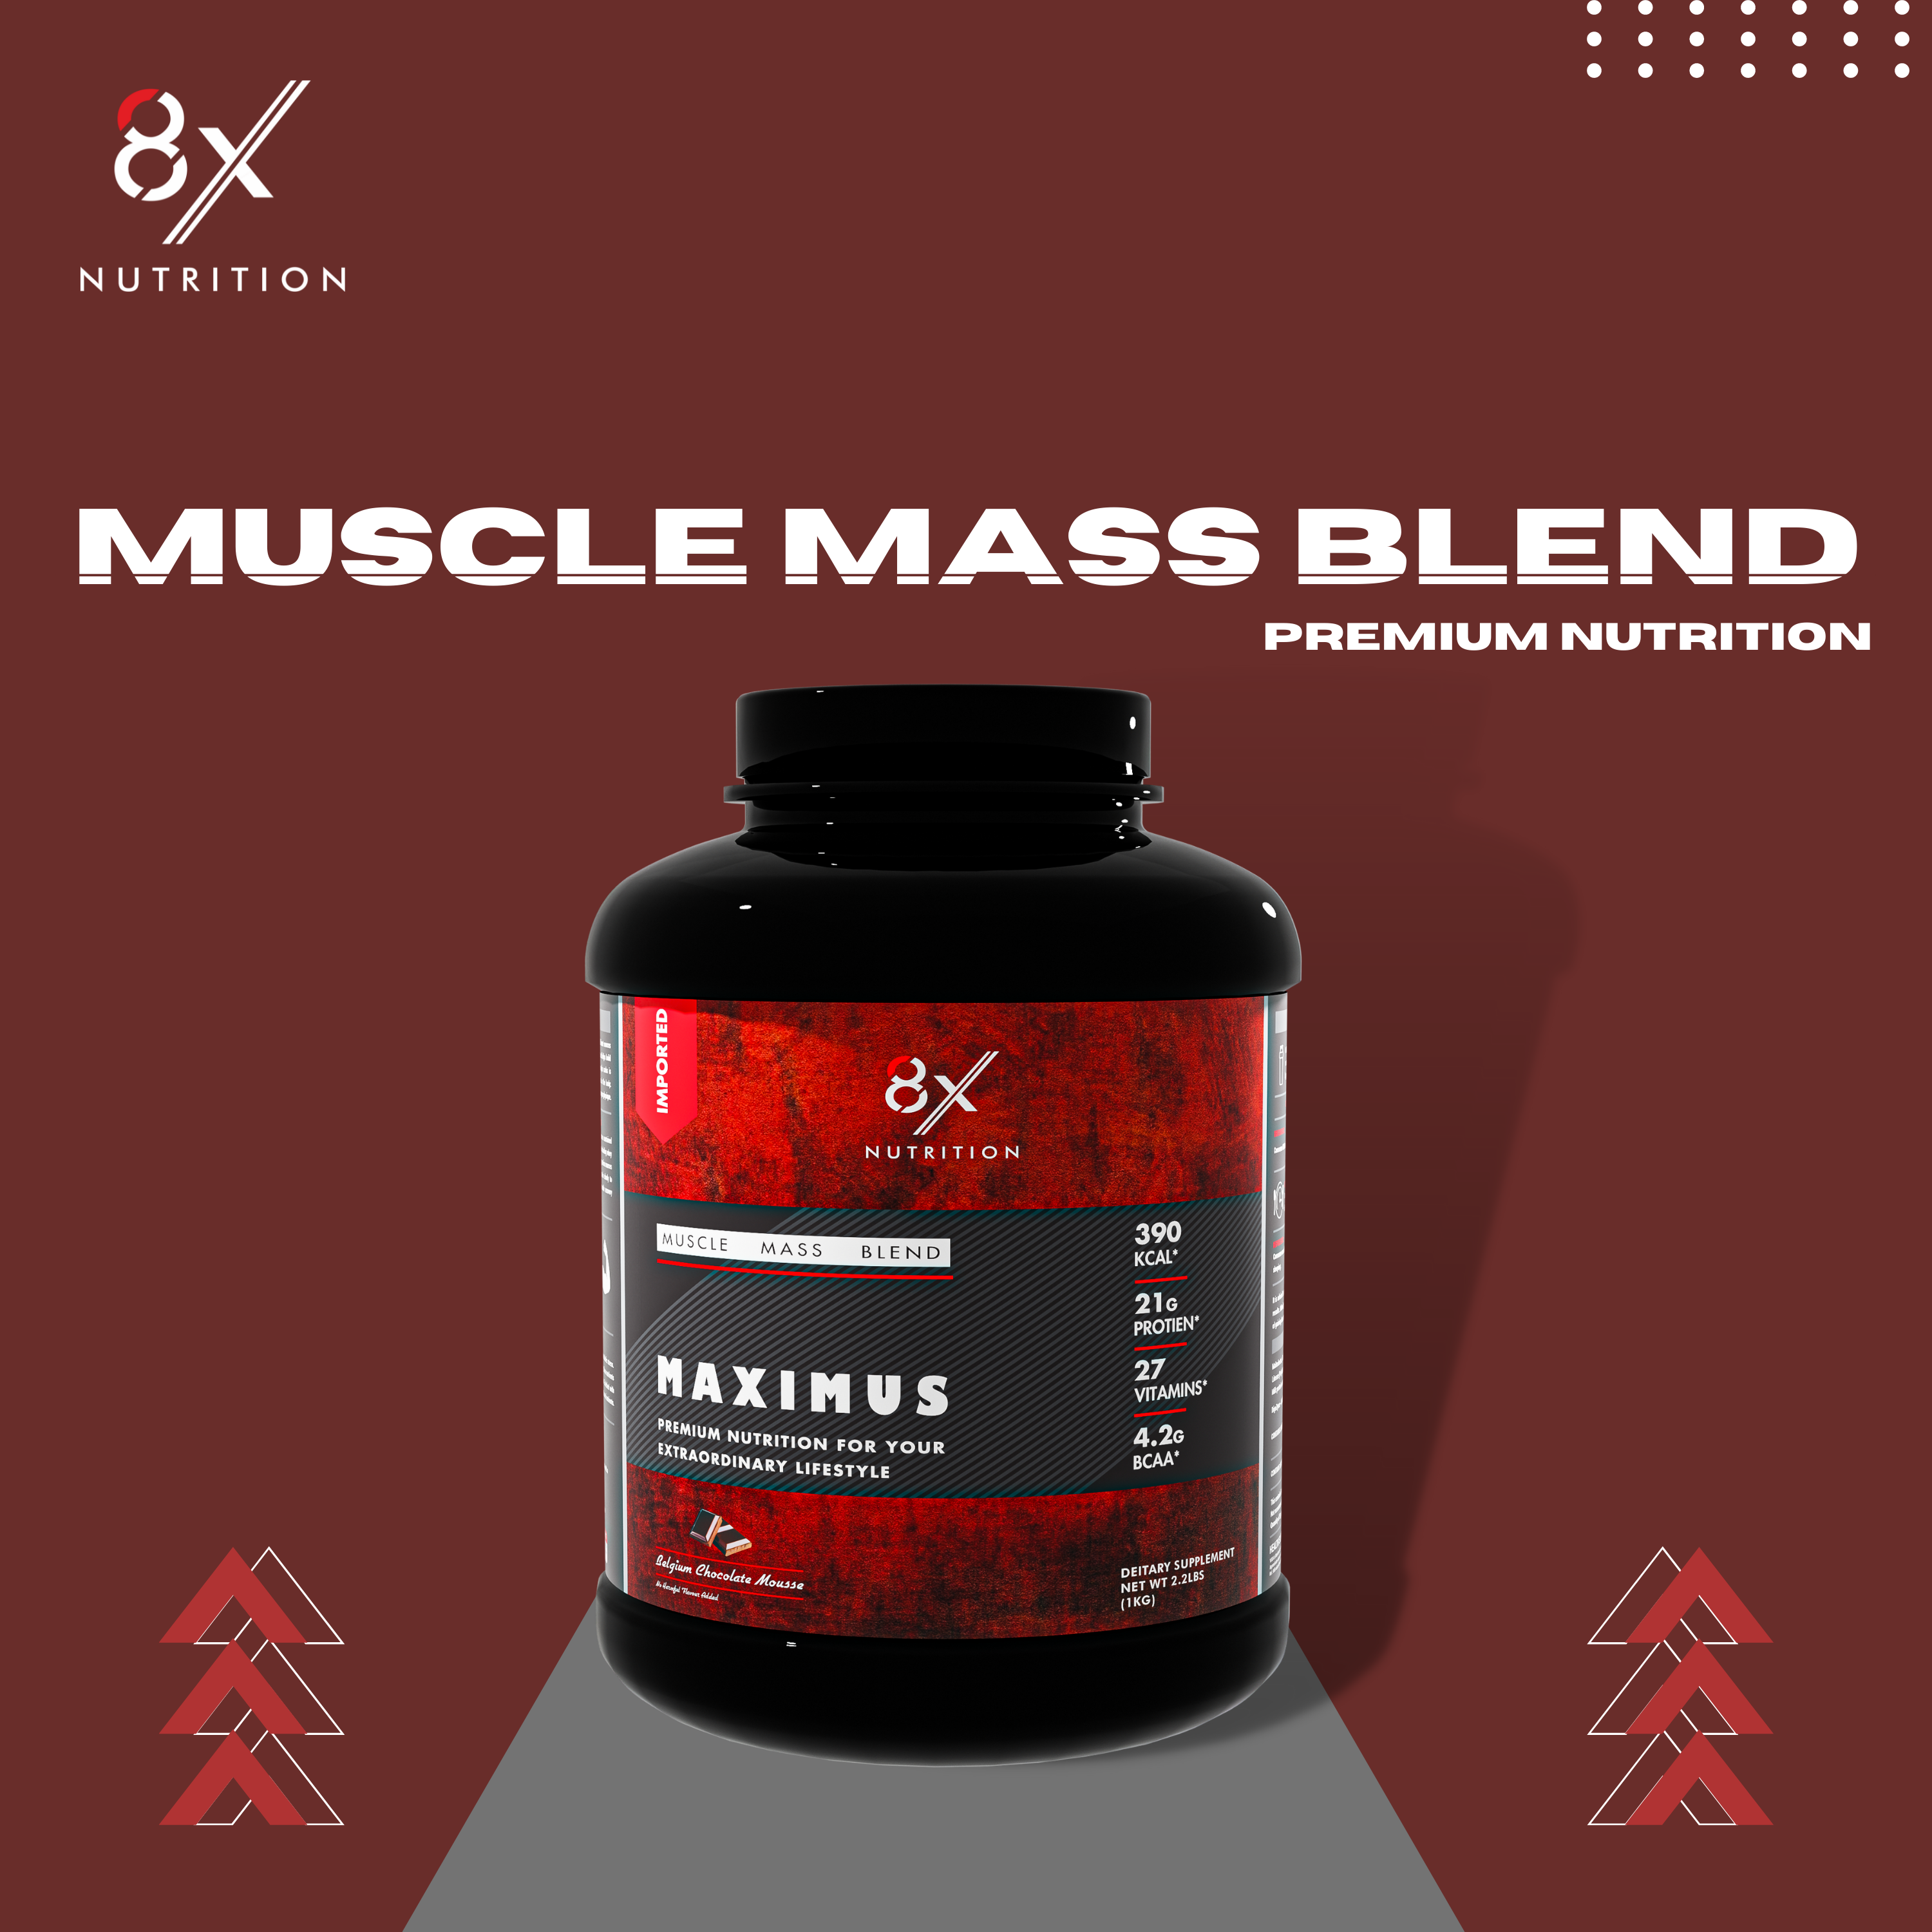 8X Nutrition Muscle Mass Blend with Complex Carbs and Proteins in 3:1 ratio (6.6 LBS) - BELGIUM CHOCOLATE MOUSSE